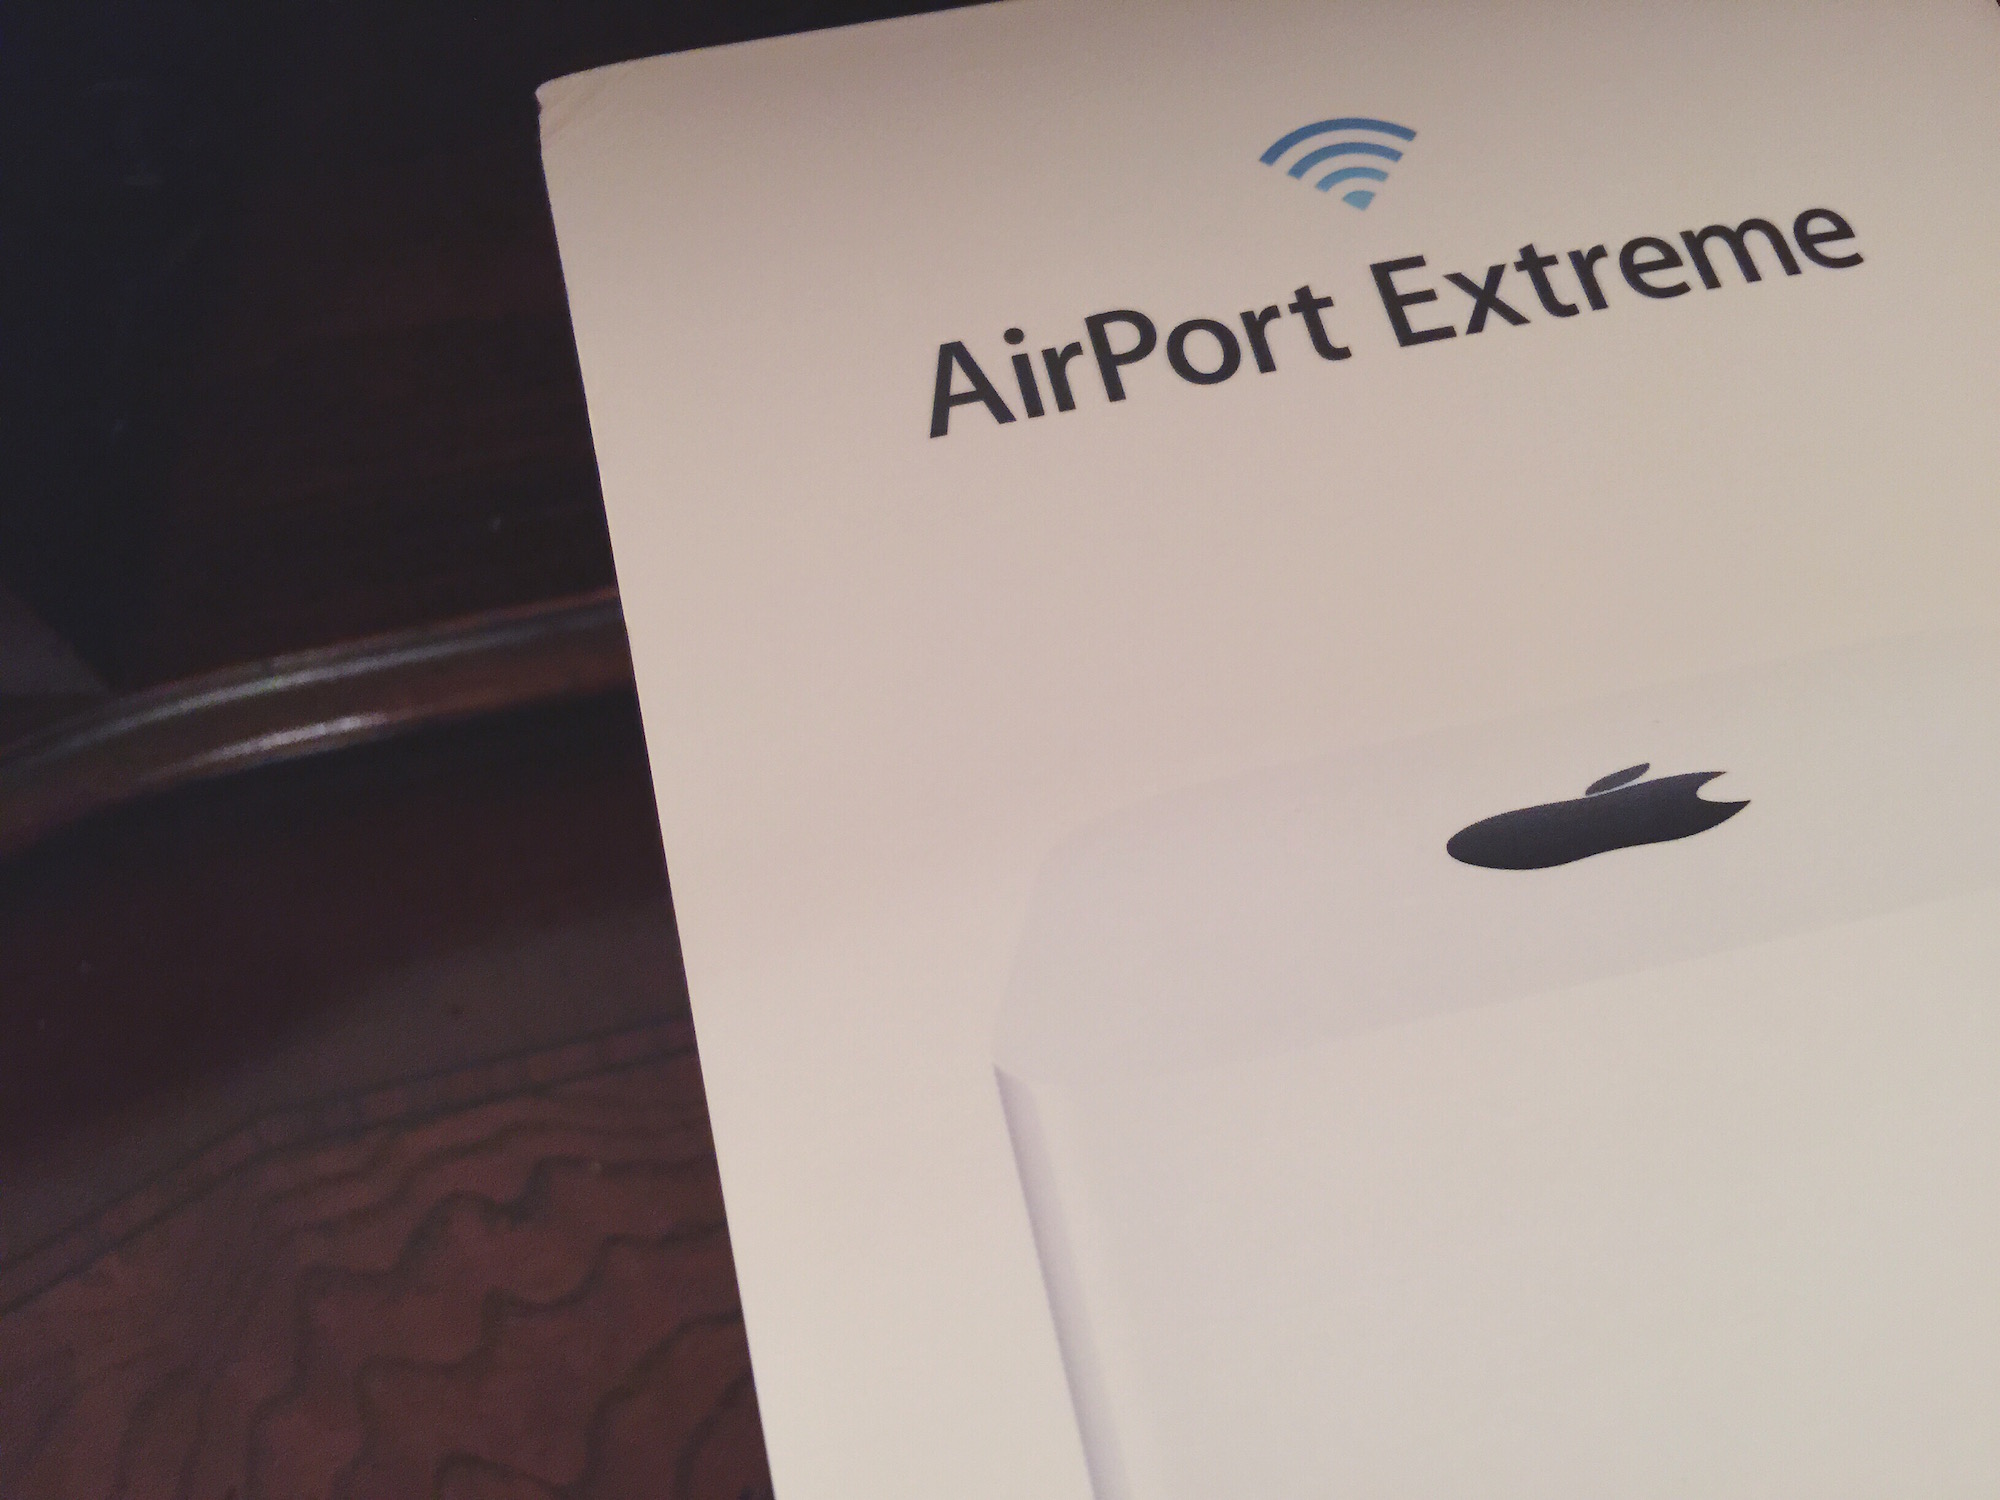 airport extreme software download mac